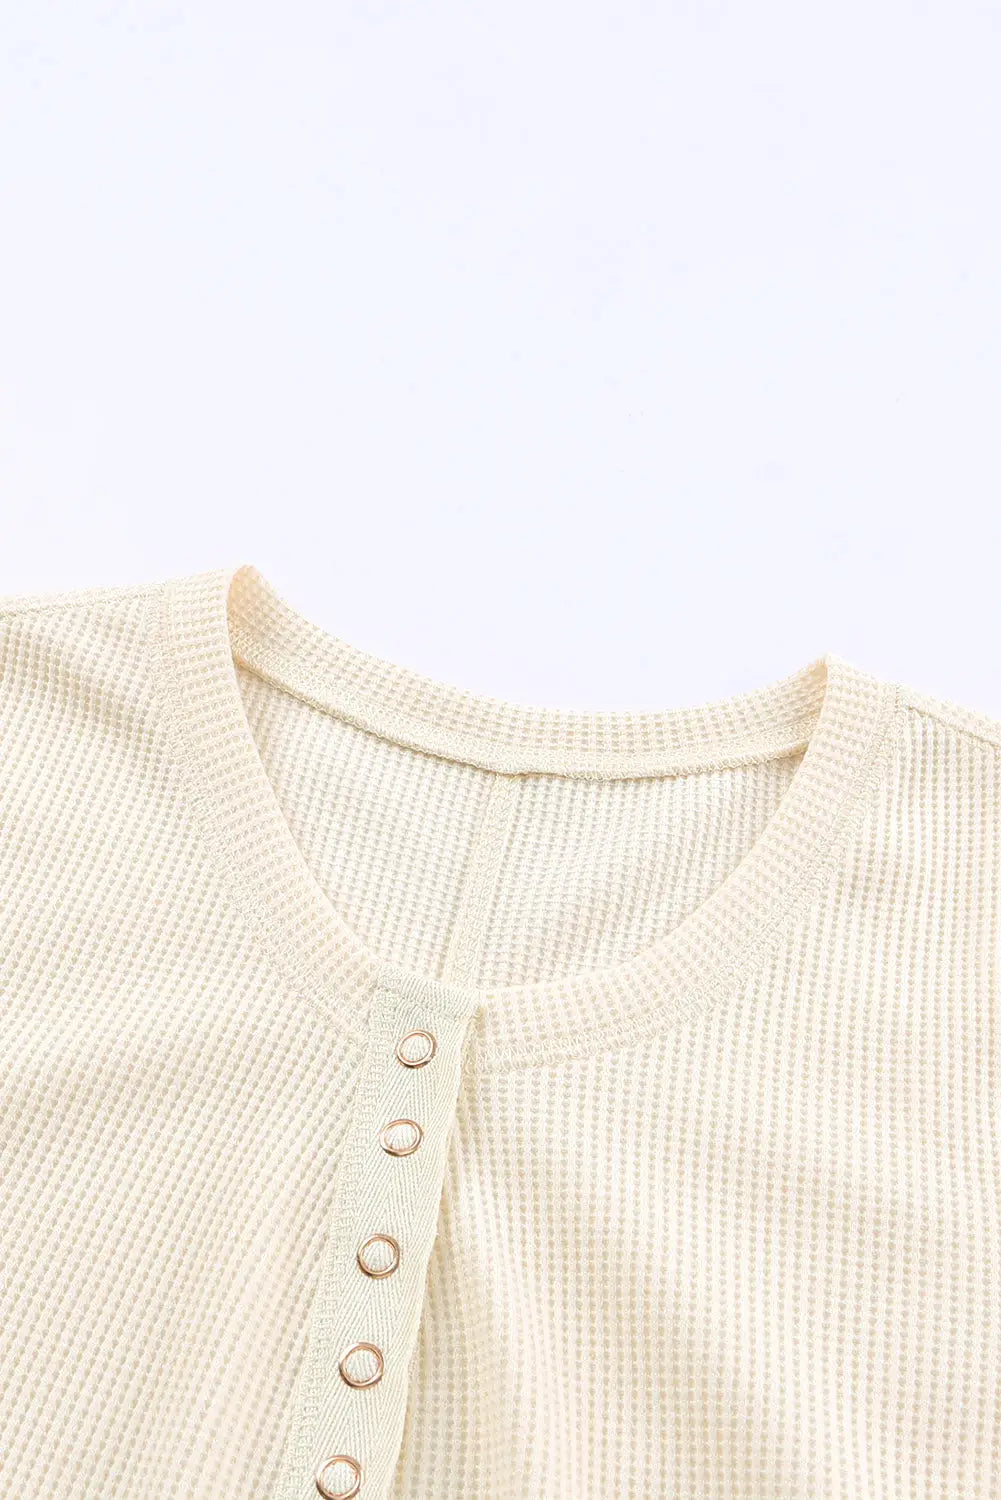 Sky blue waffle knit long sleeve buttoned henley top - tops